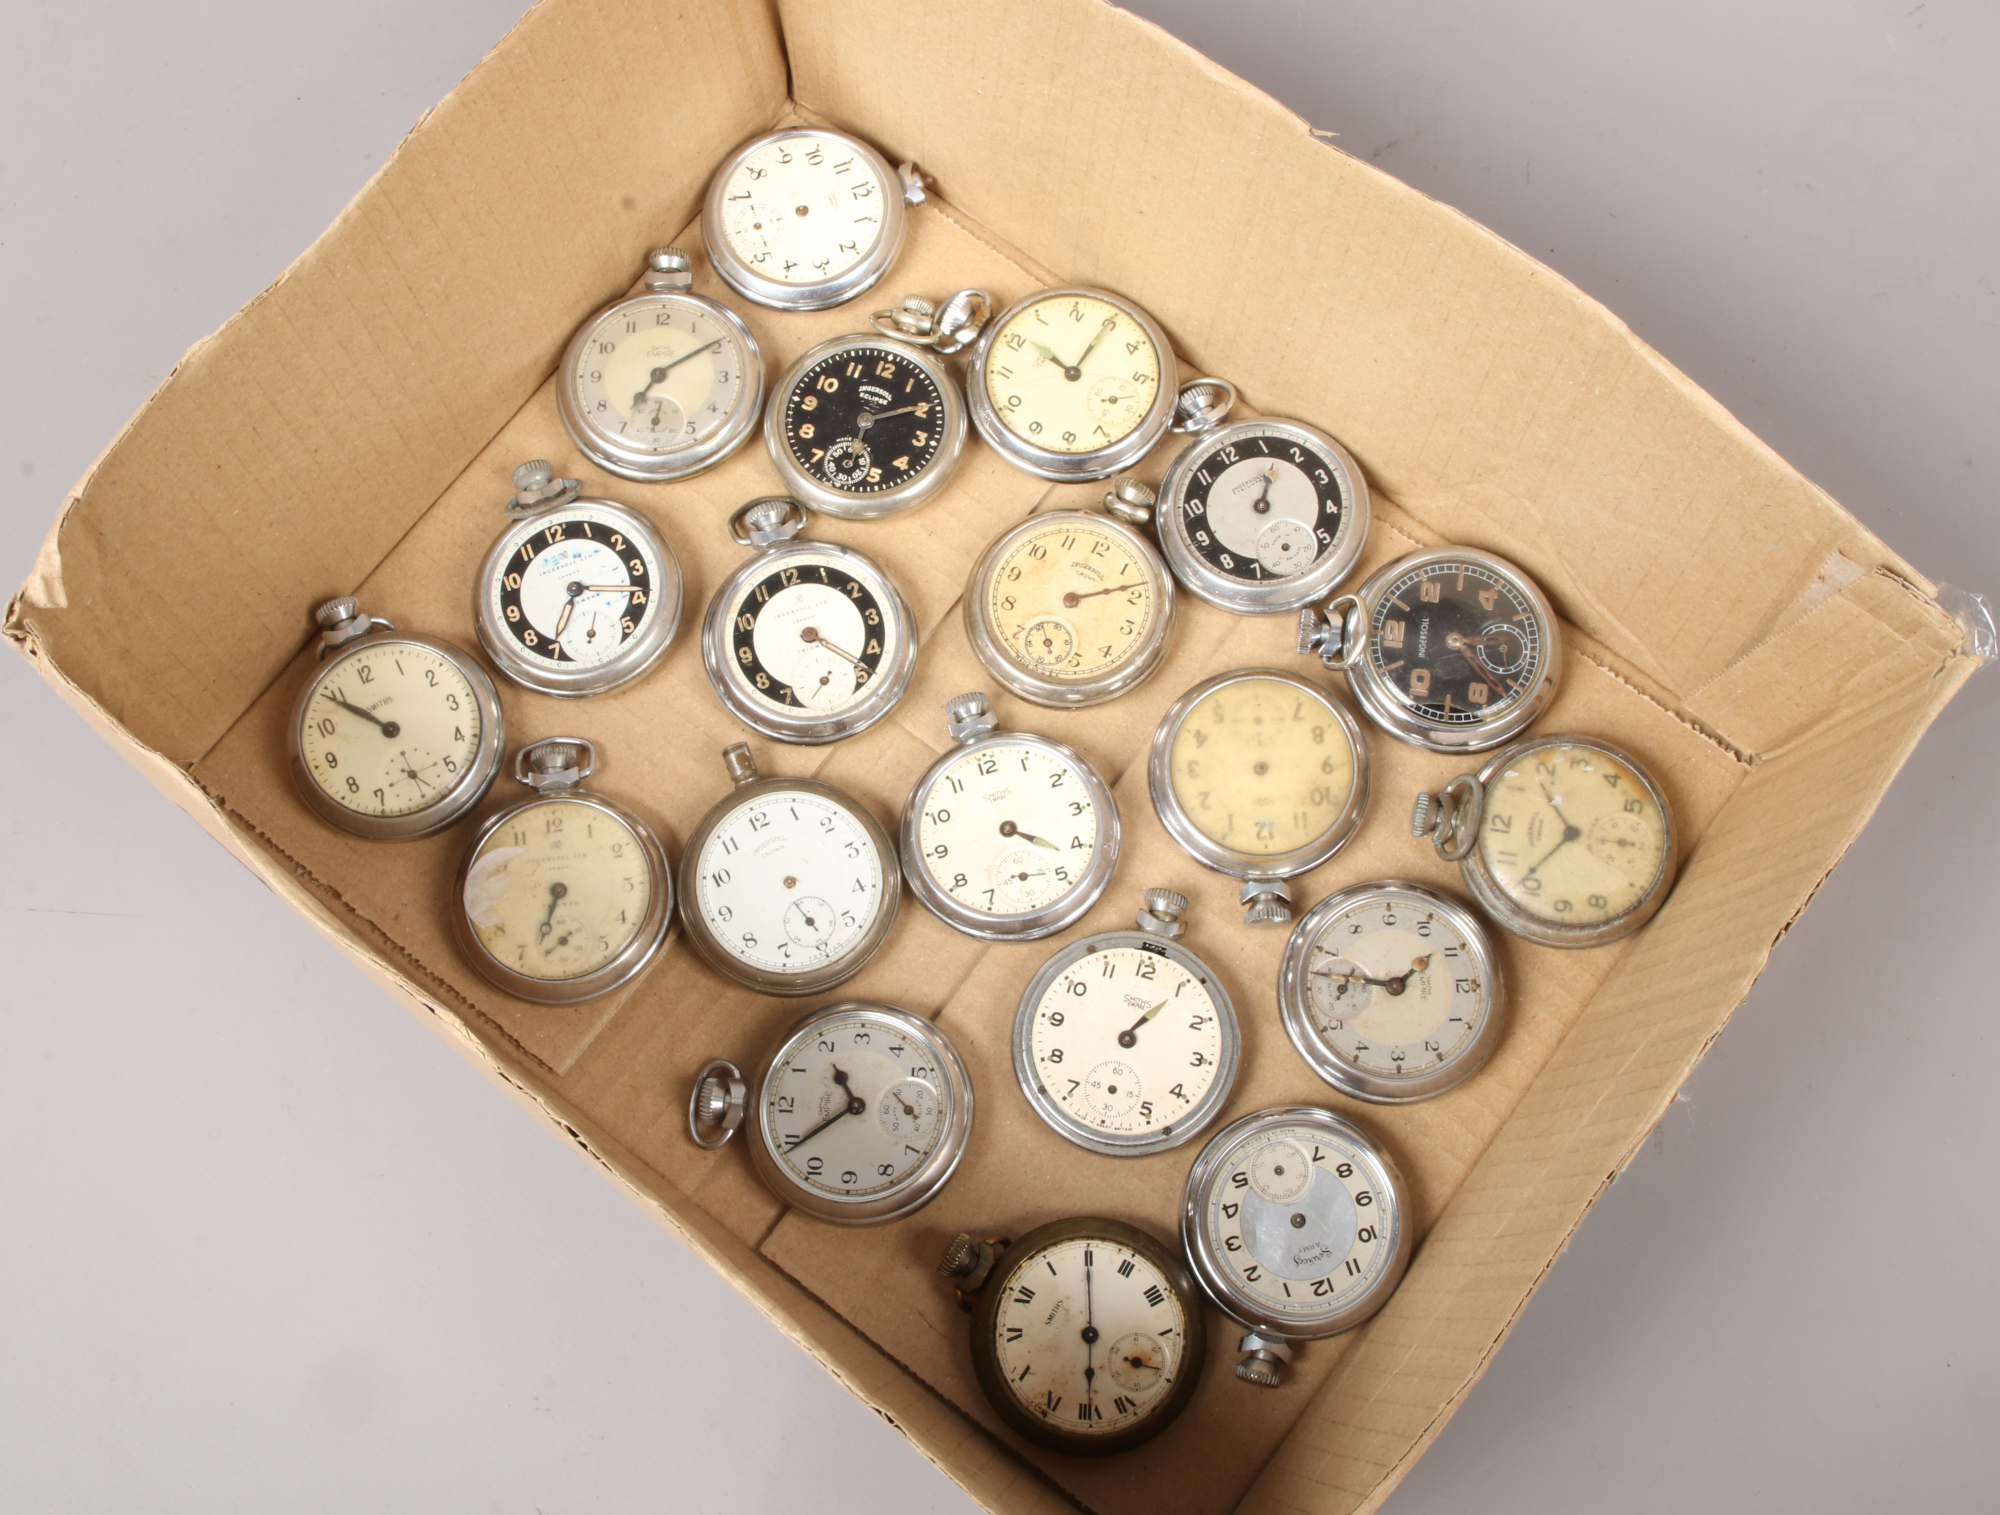 A collection of mid 20th century Smiths and Ingersoll pocket watches.